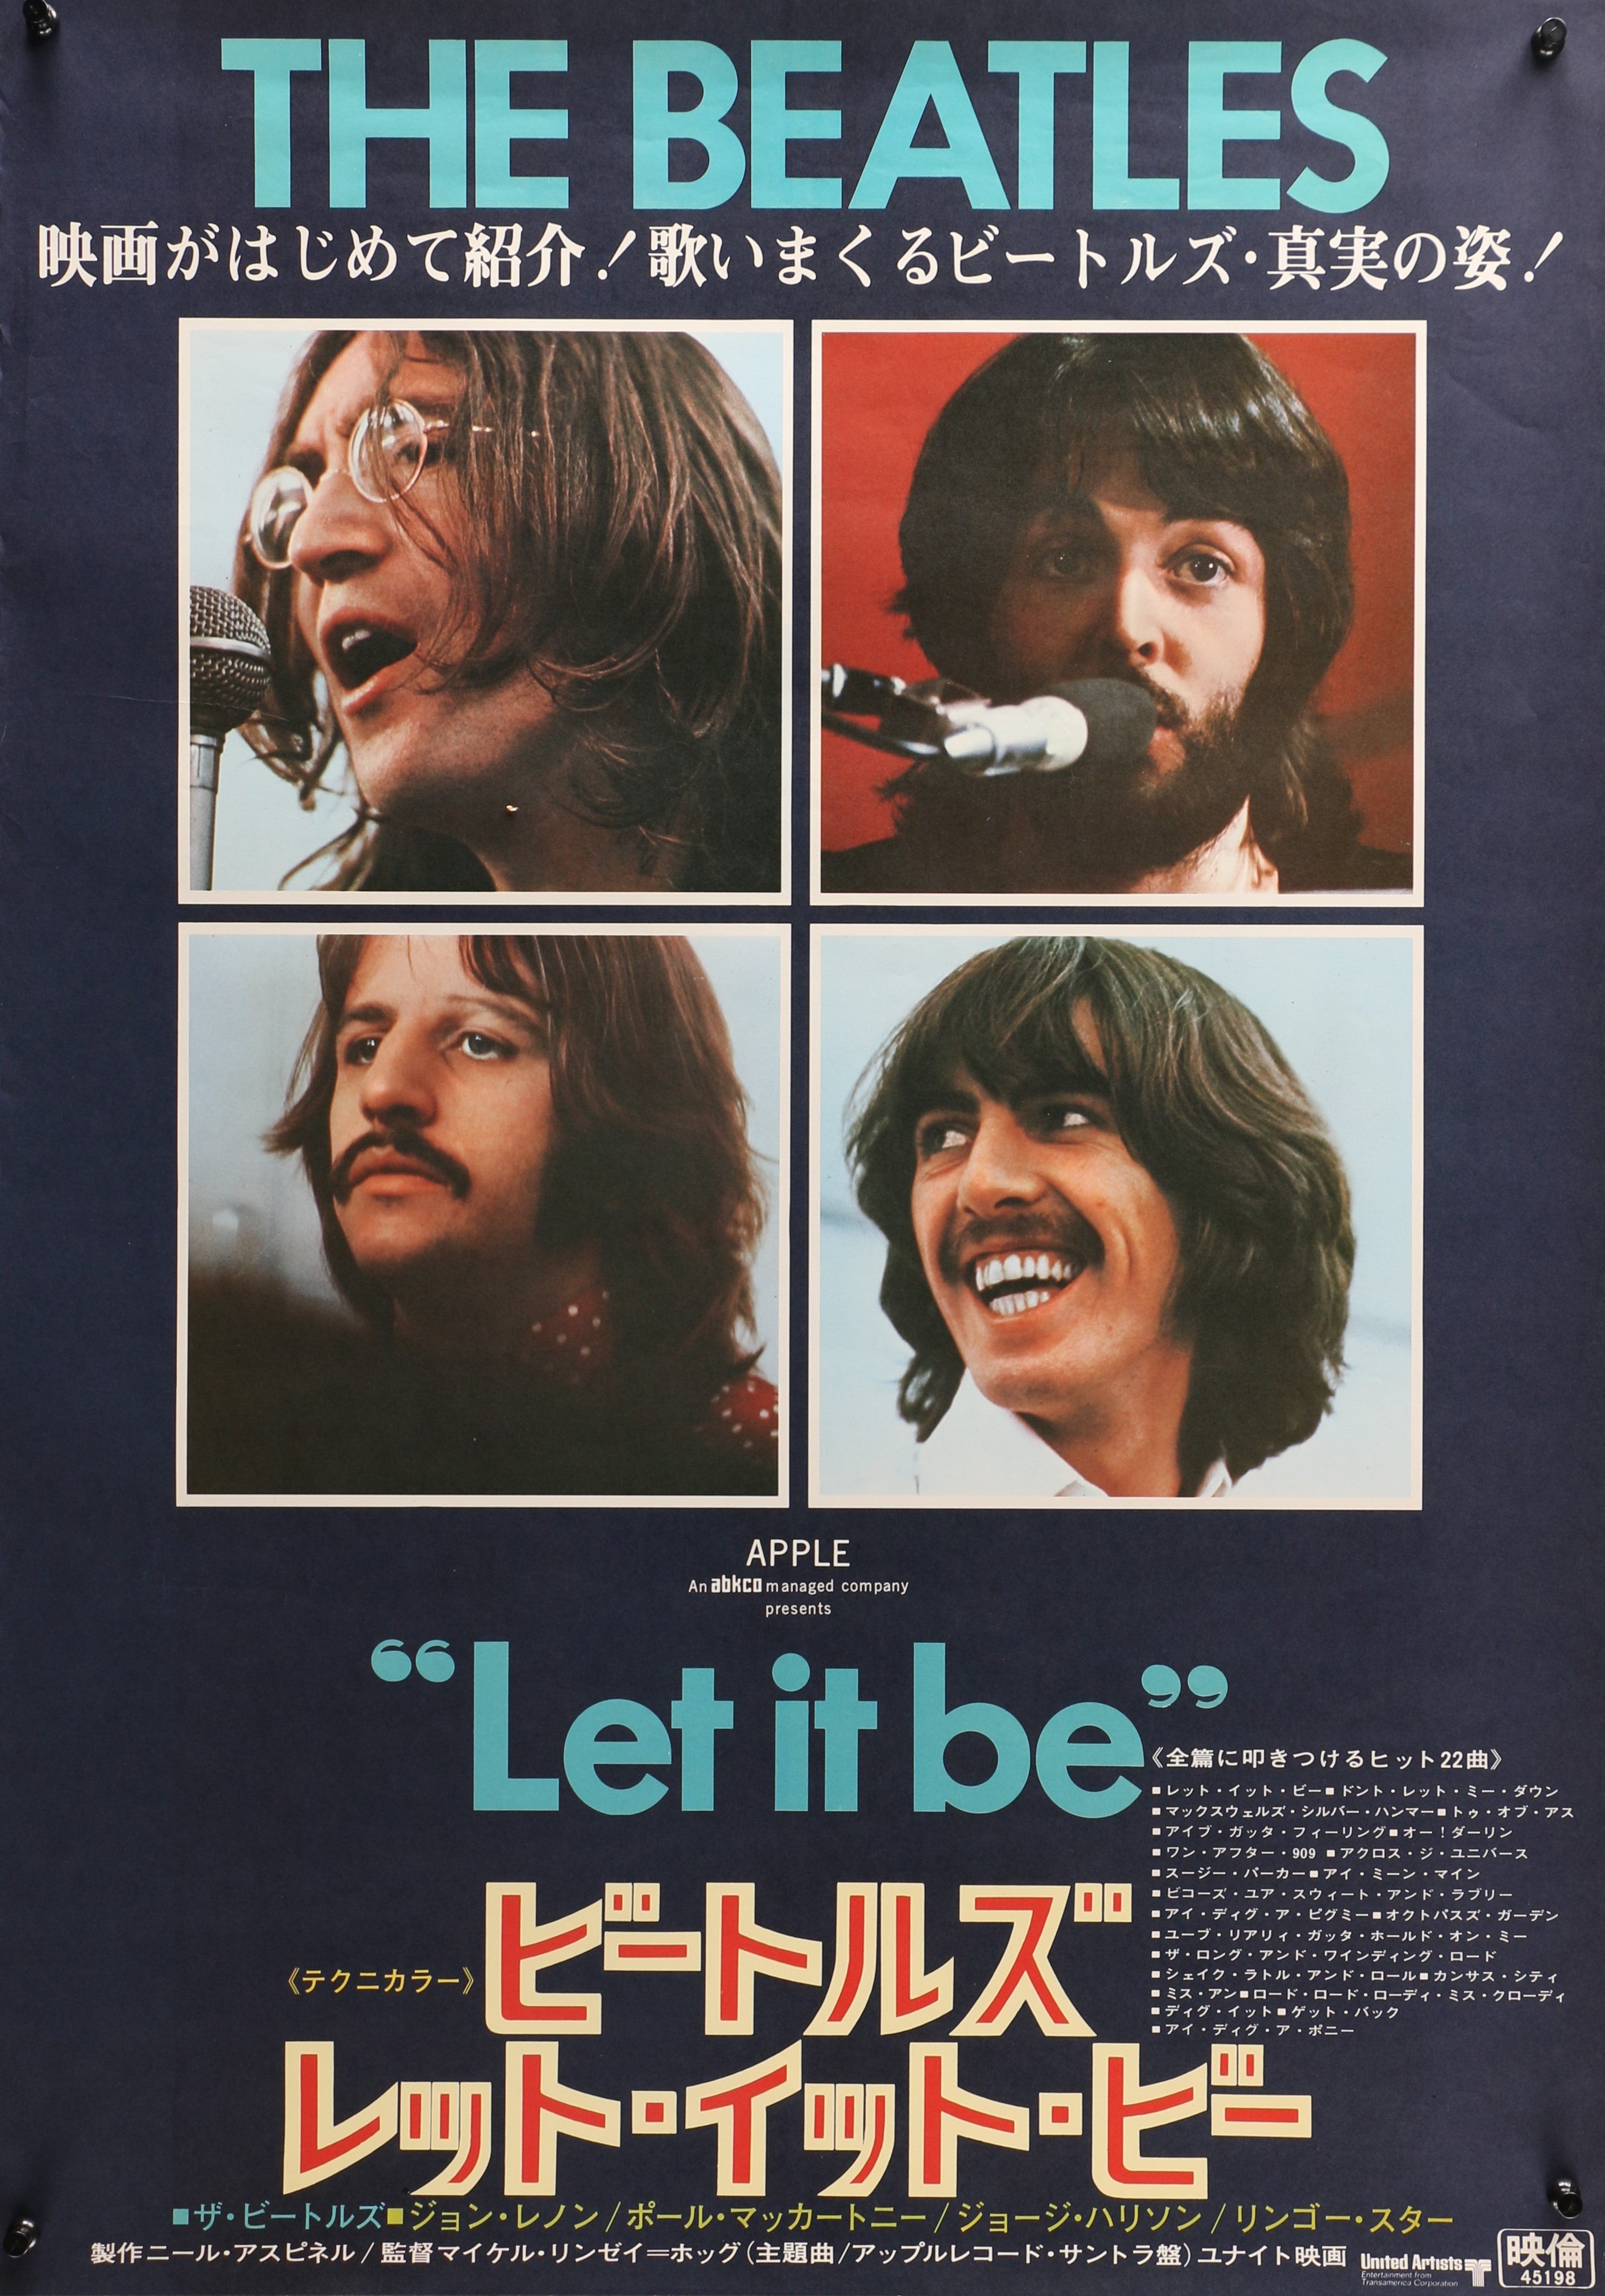 USA盤 新品】 LET IT BE レコード ビートルズ-